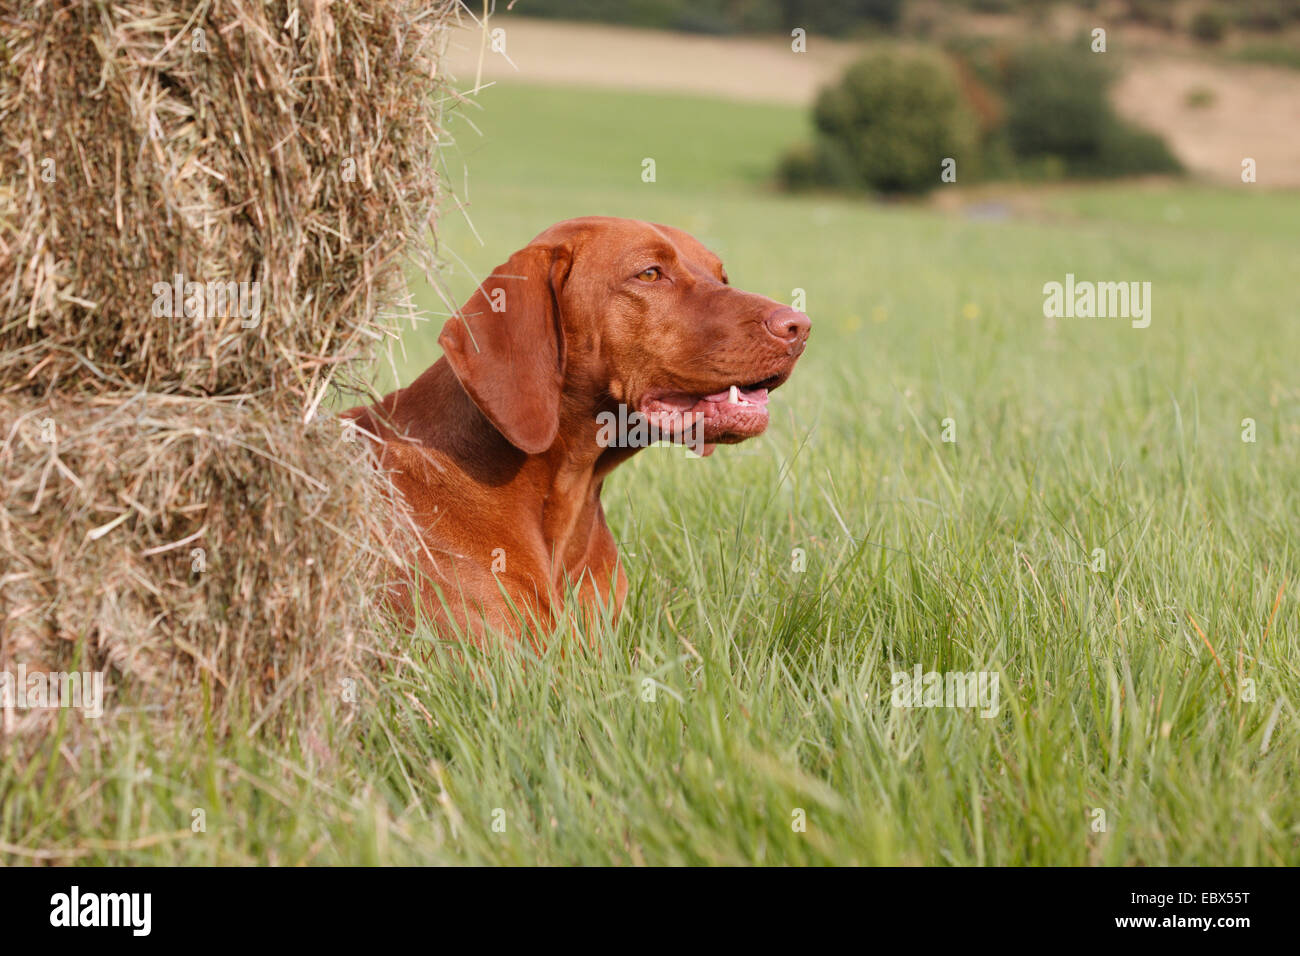 Hungarian Short-haired Pointing Dog (Canis lupus f. familiaris), lying in a meadow behind hay bales Stock Photo